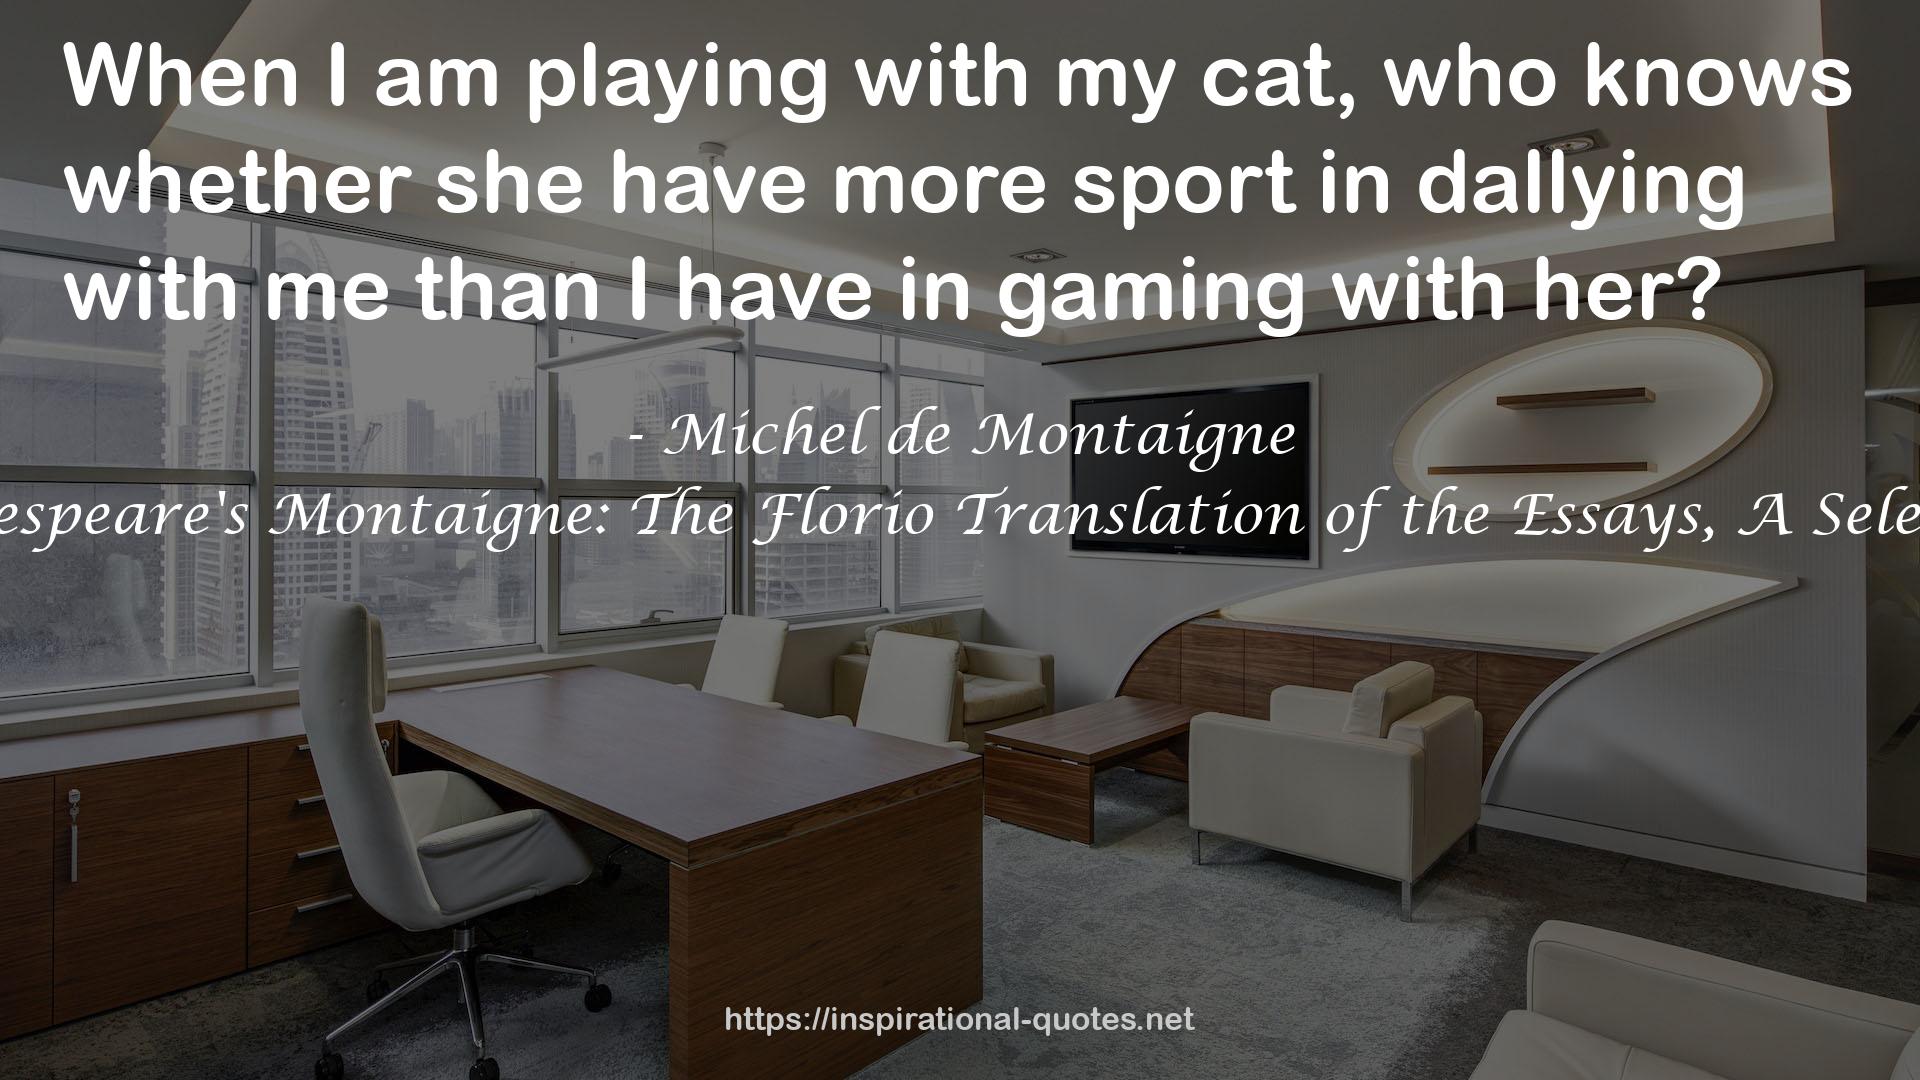 Shakespeare's Montaigne: The Florio Translation of the Essays, A Selection QUOTES